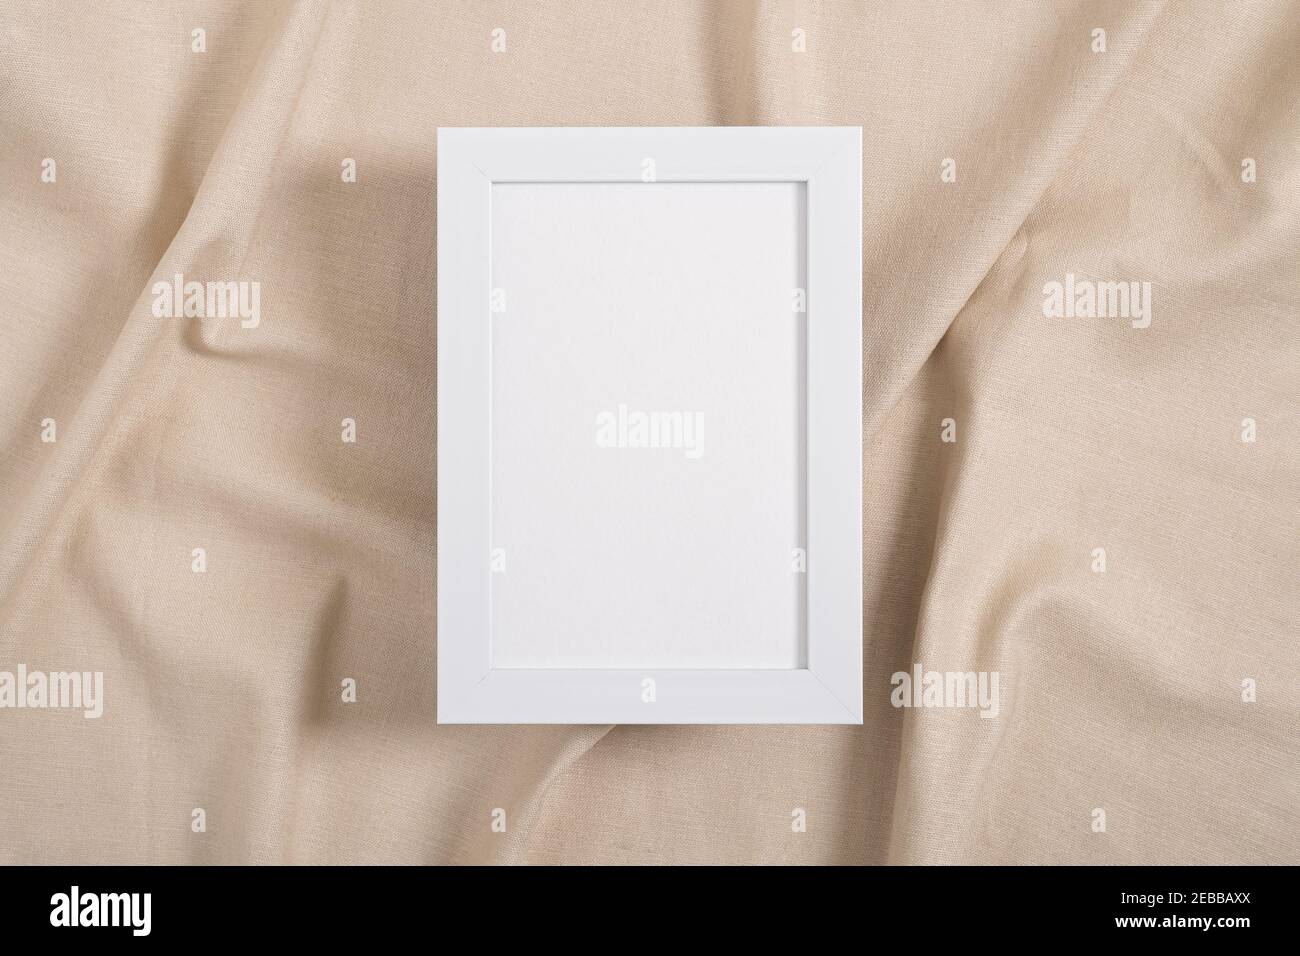 White picture frame mockup on a beige textile Stock Photo